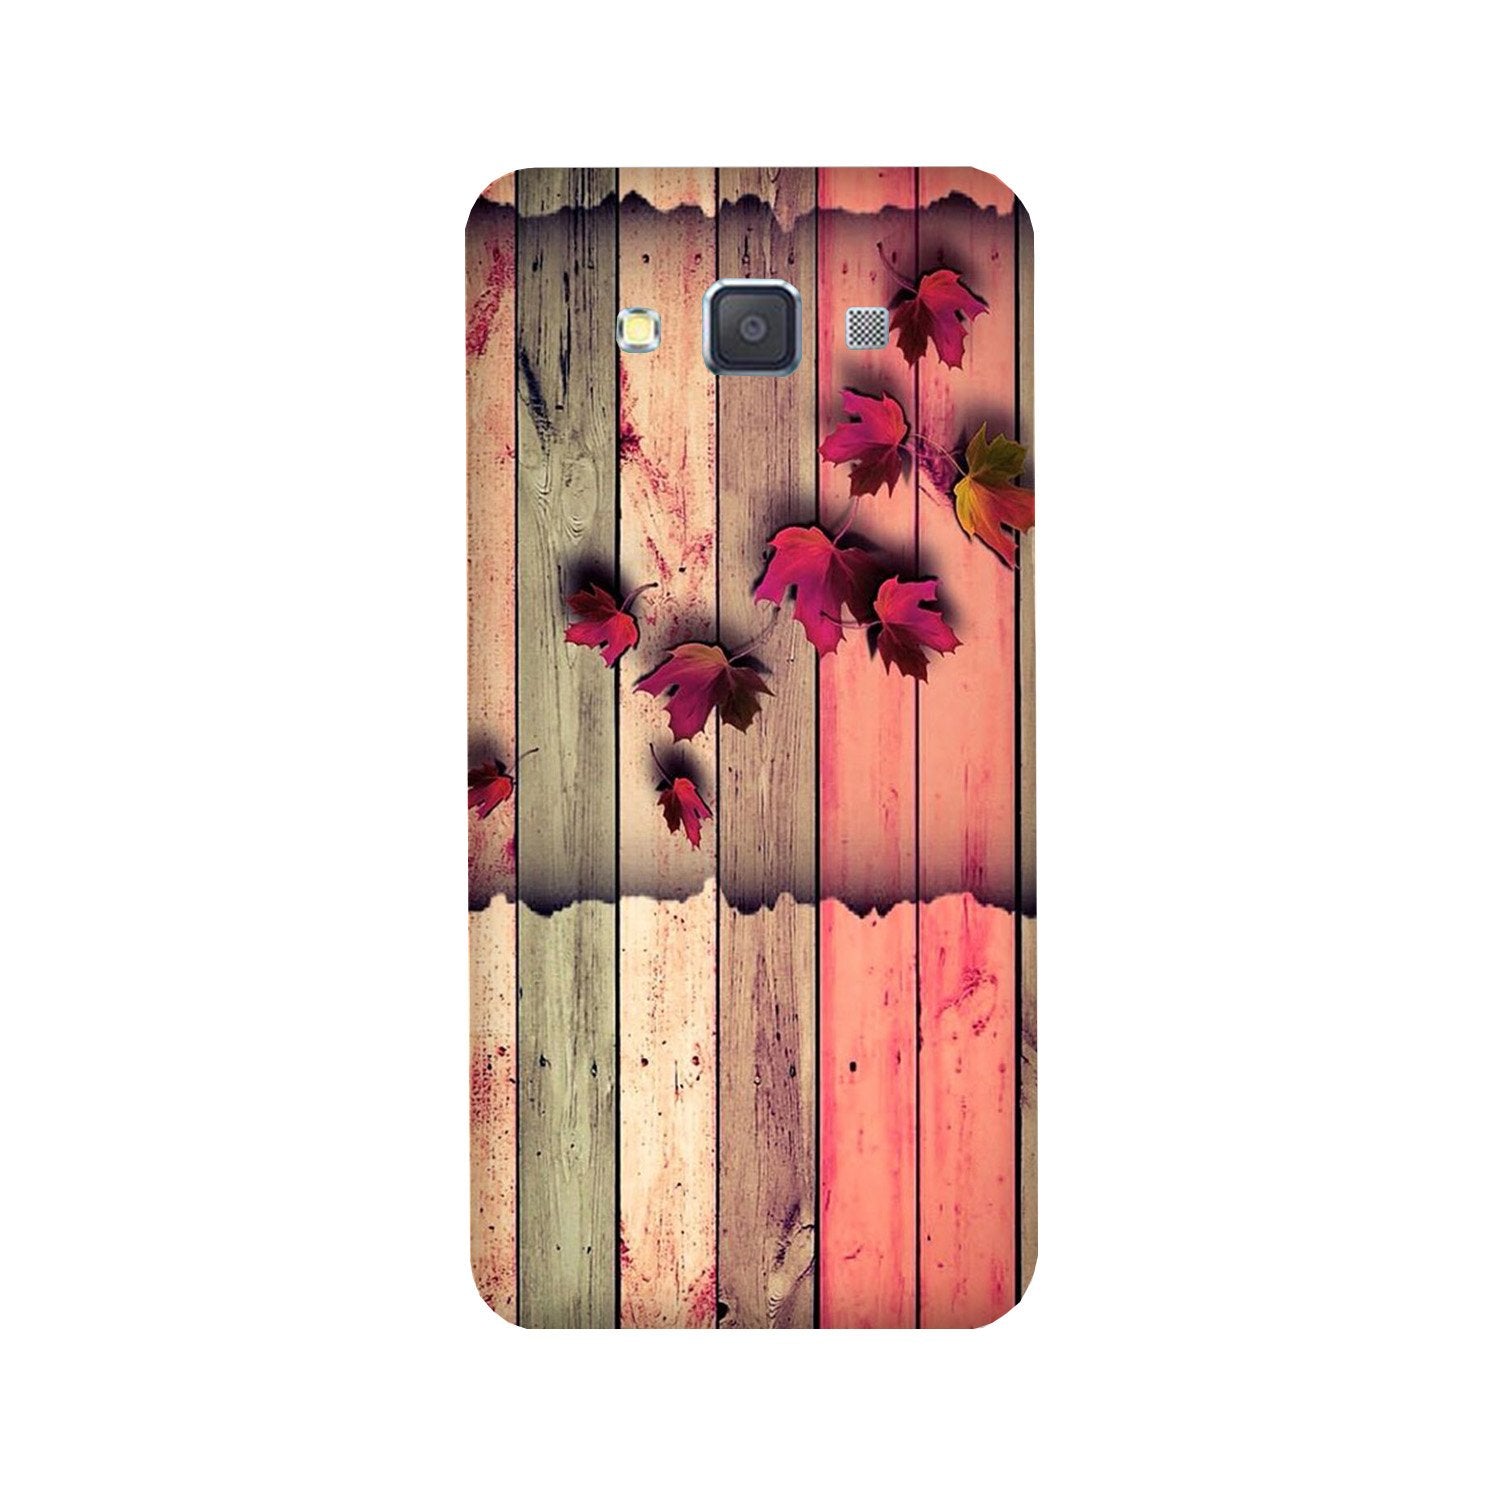 Wooden look2 Case for Galaxy Grand 2